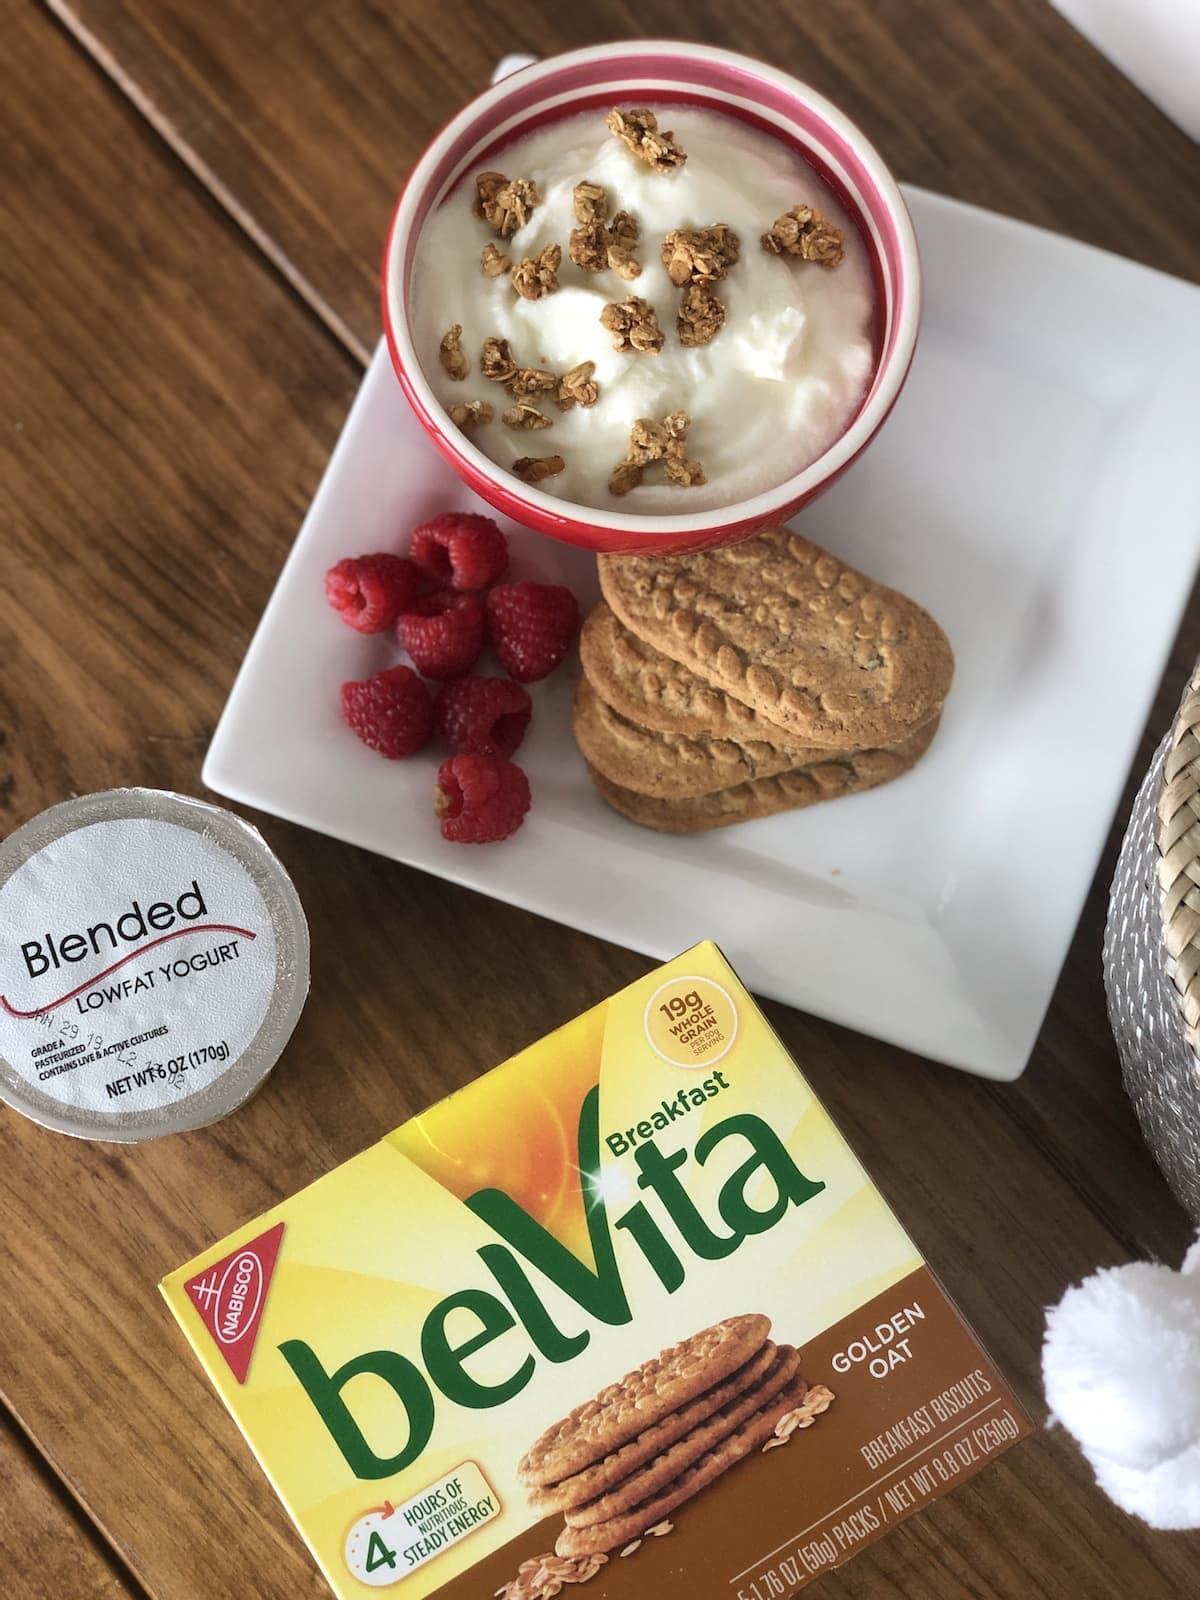 New Year, New You: 5 Tips to Be the Best You - belVita Breakfast Biscuits